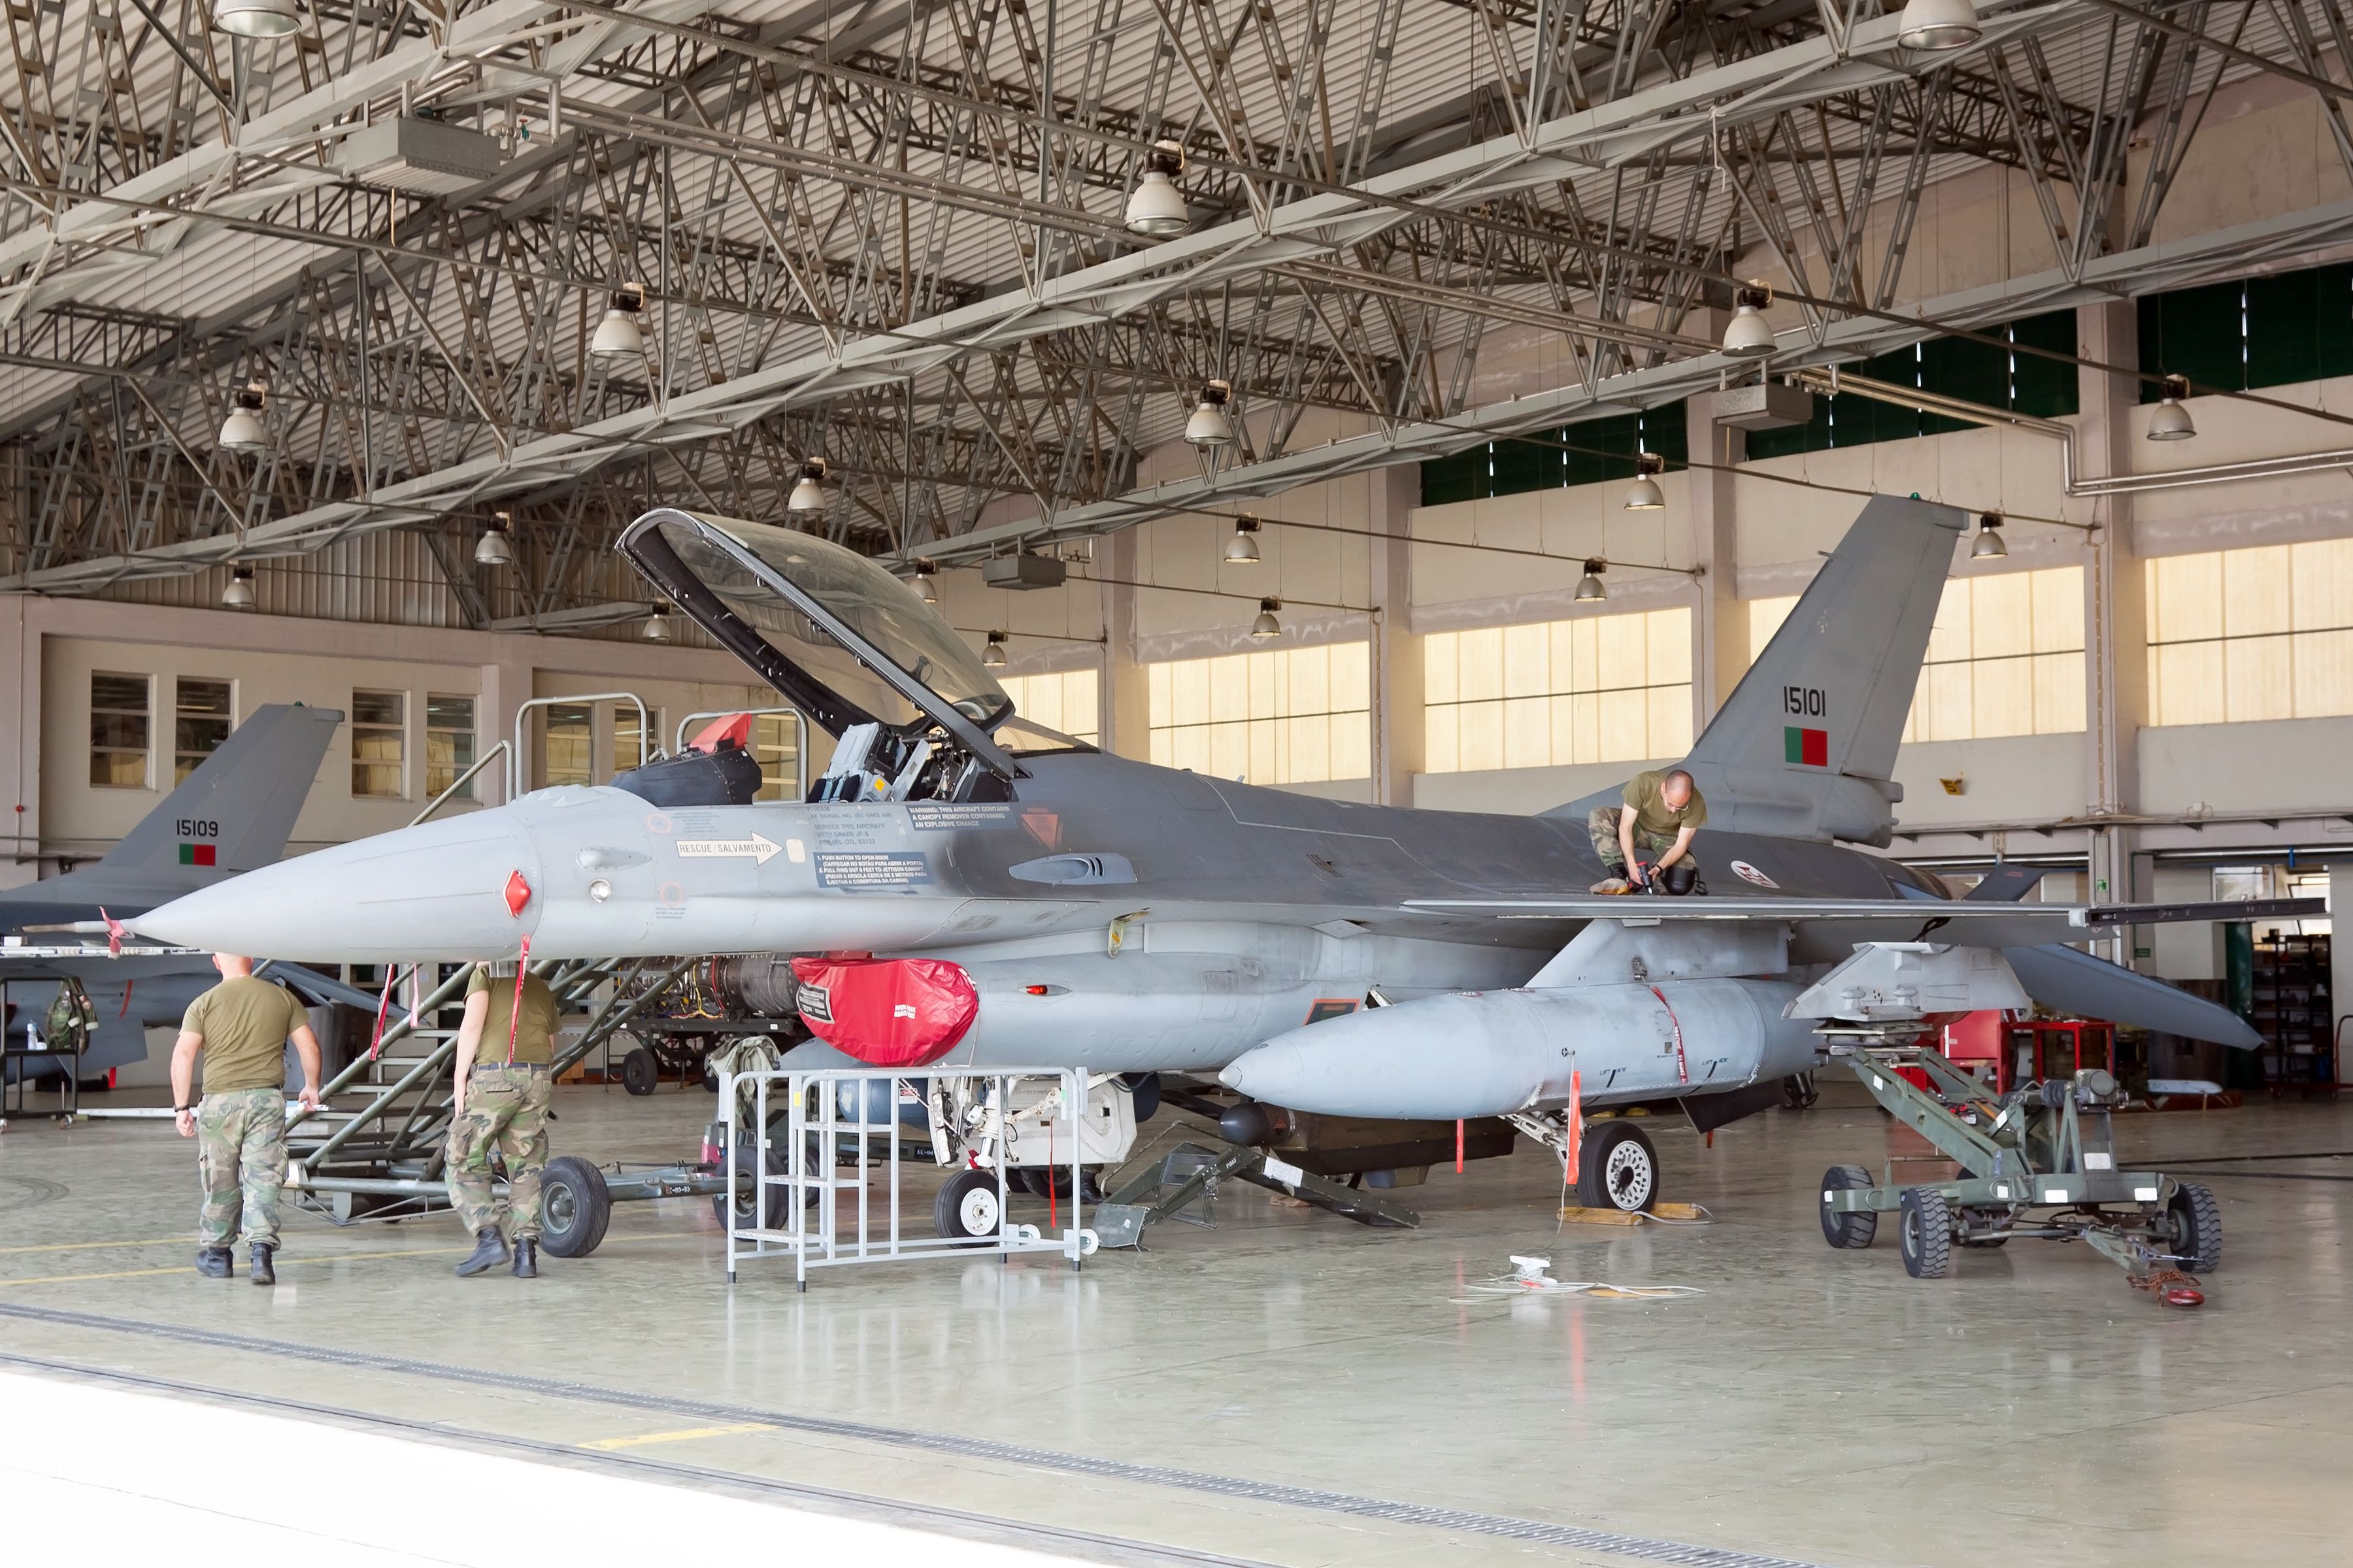 A Portuguese F-16 sits in a hangar for maintenance on April 7, 2011 in Monte Real, Portugal